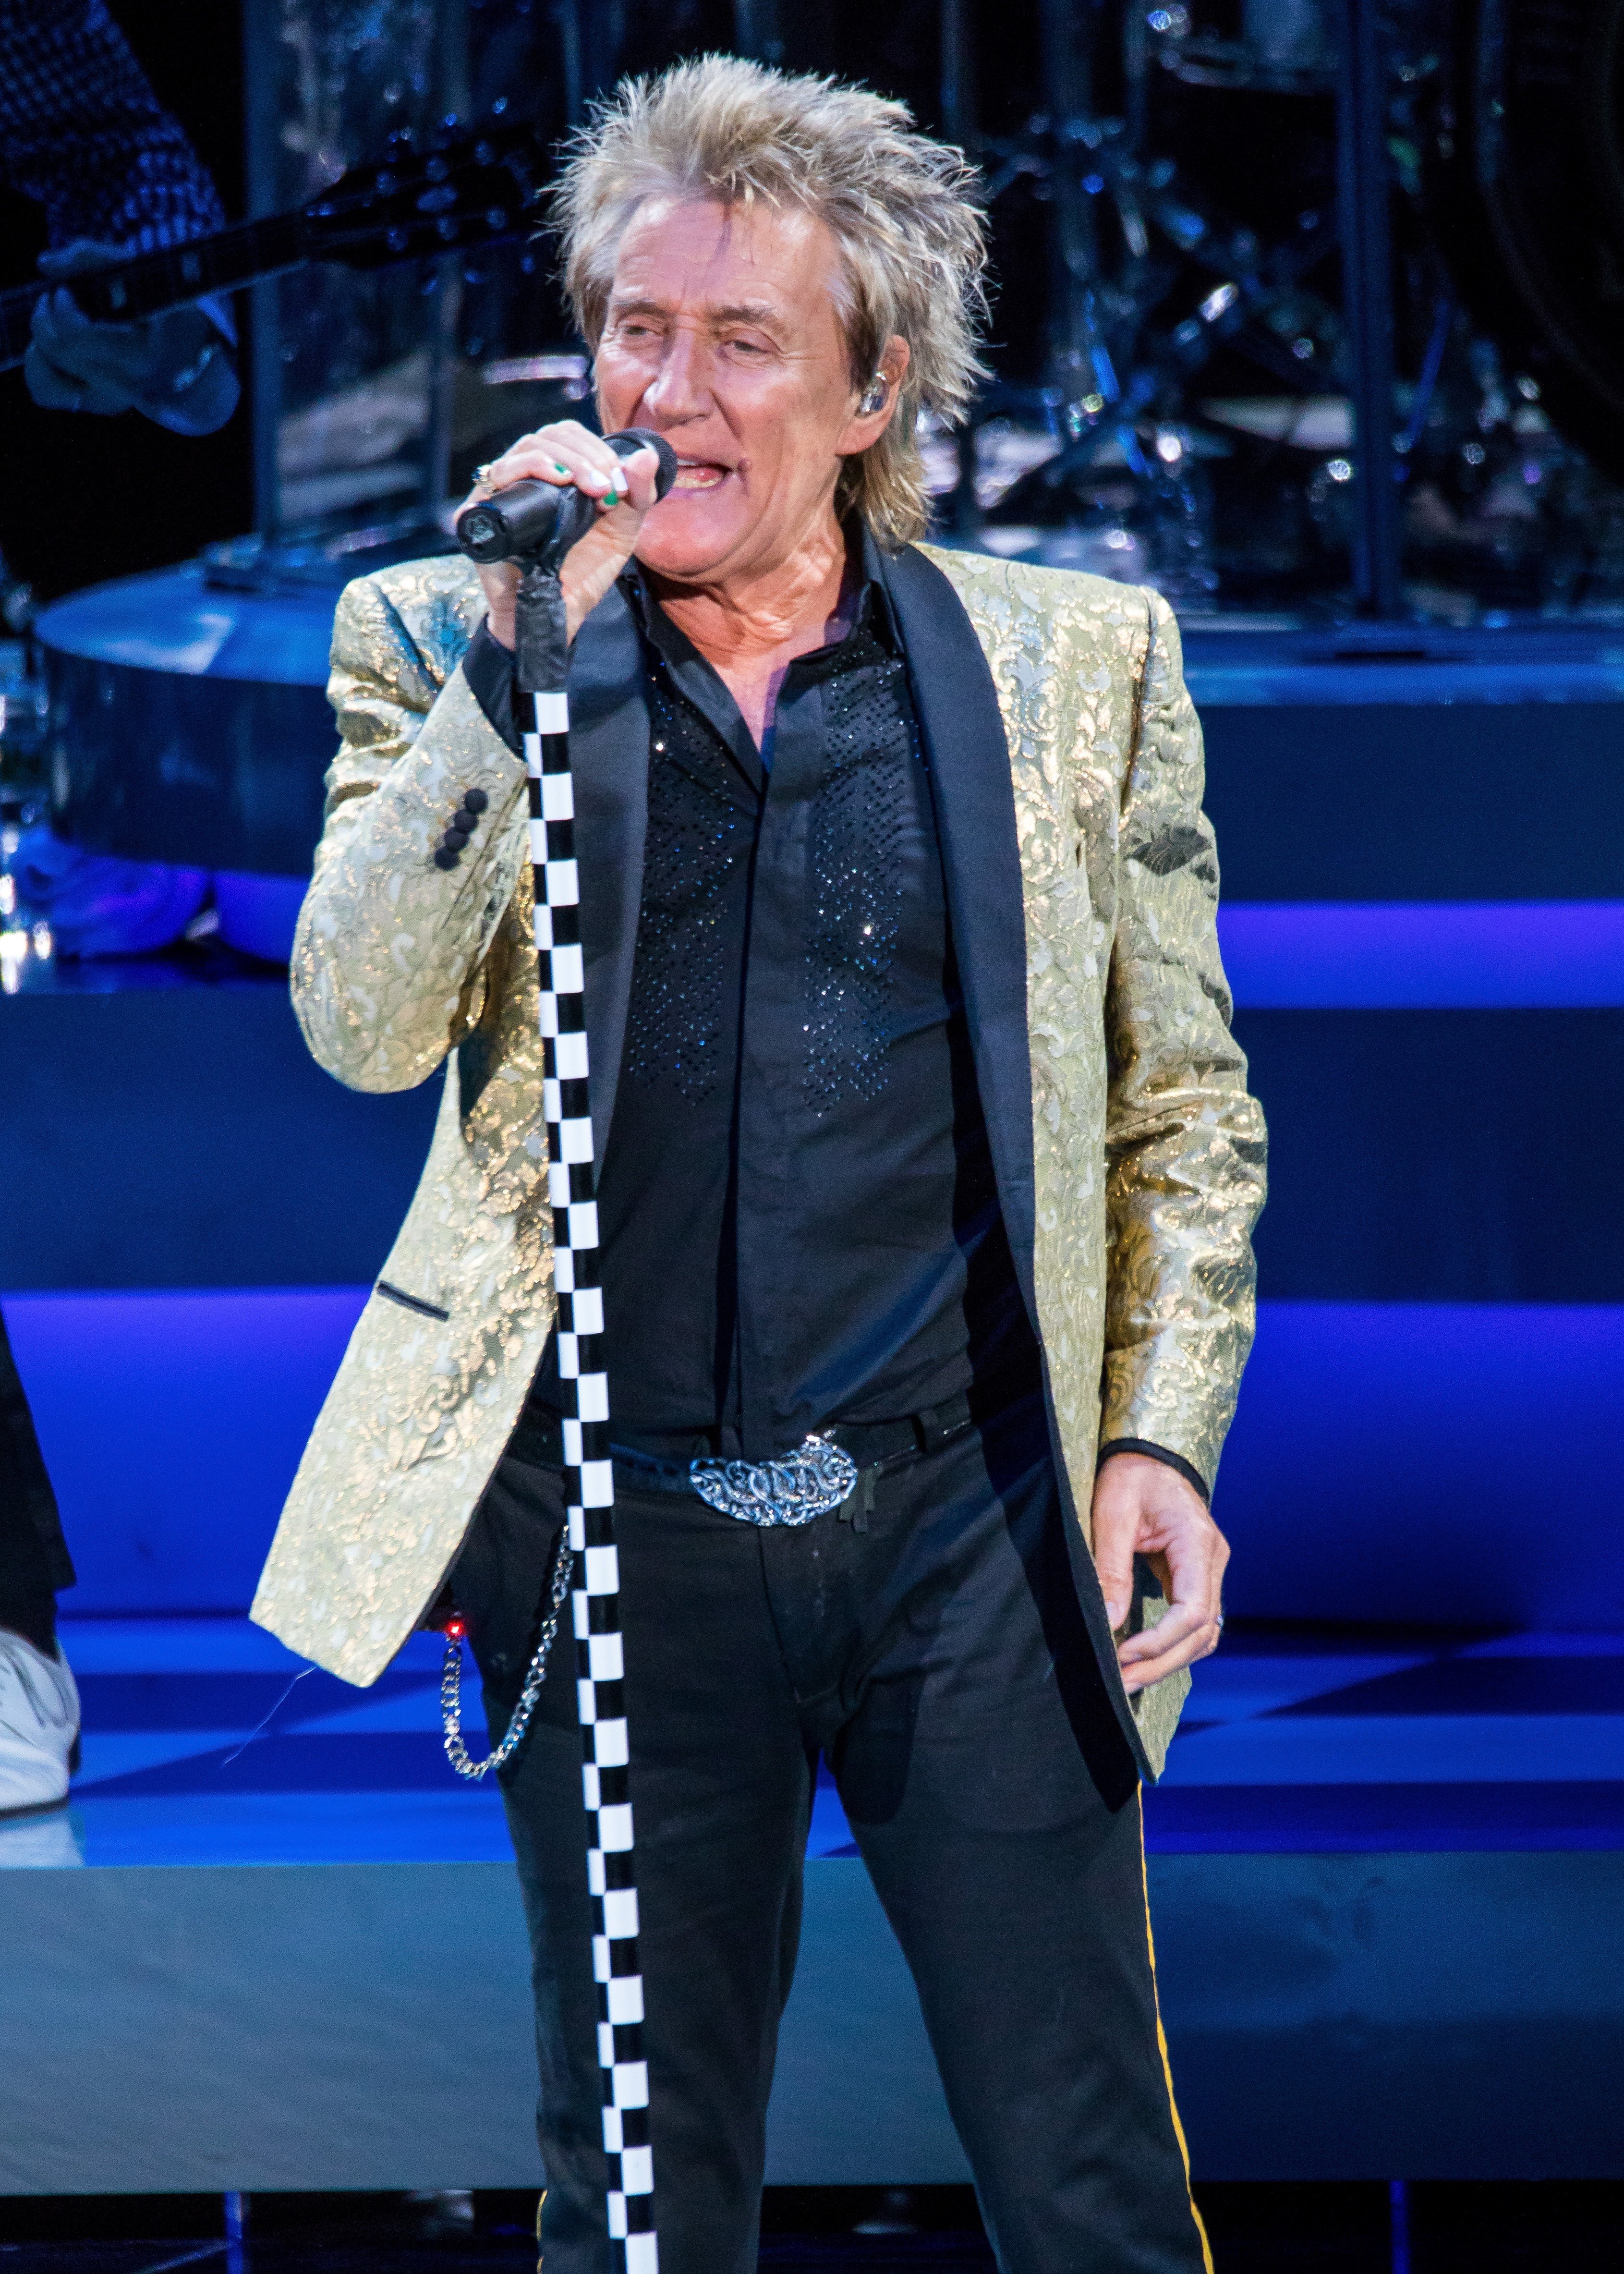 Sir Rod Stewart performs at DTE Energy Music Theater on August 1, 2017 in Clarkston, Michigan | Photo: Getty Images